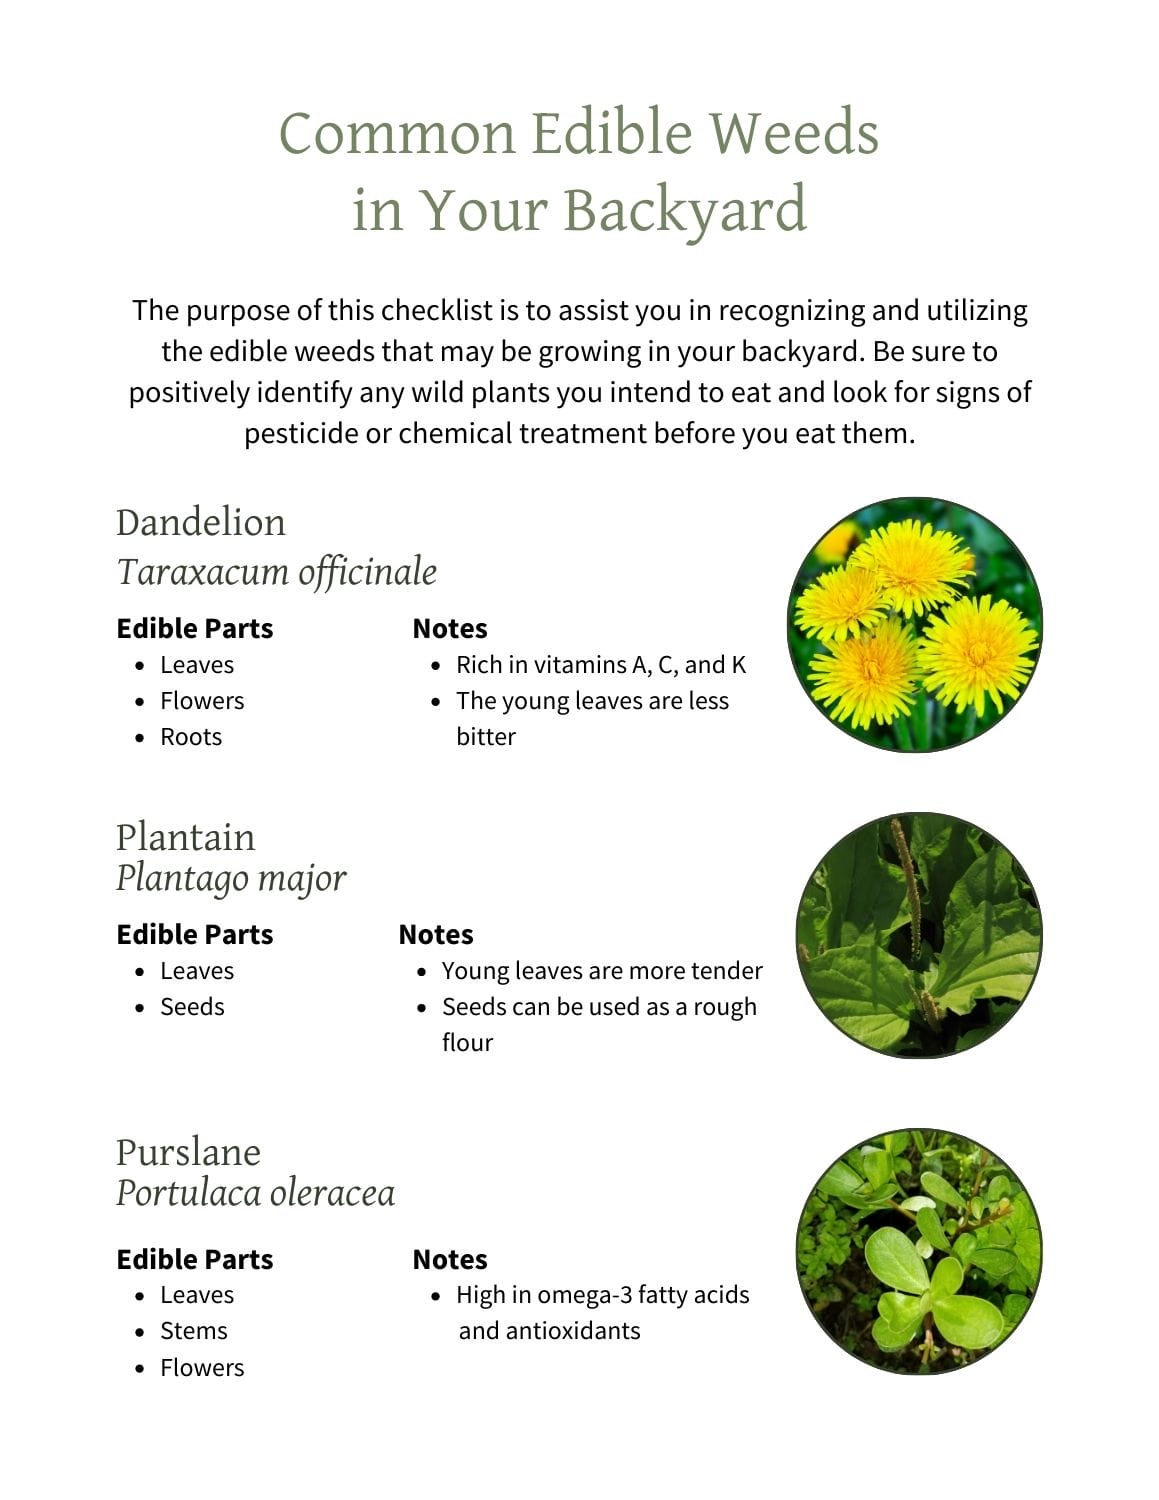 My printable Common Edible Weeds guide.